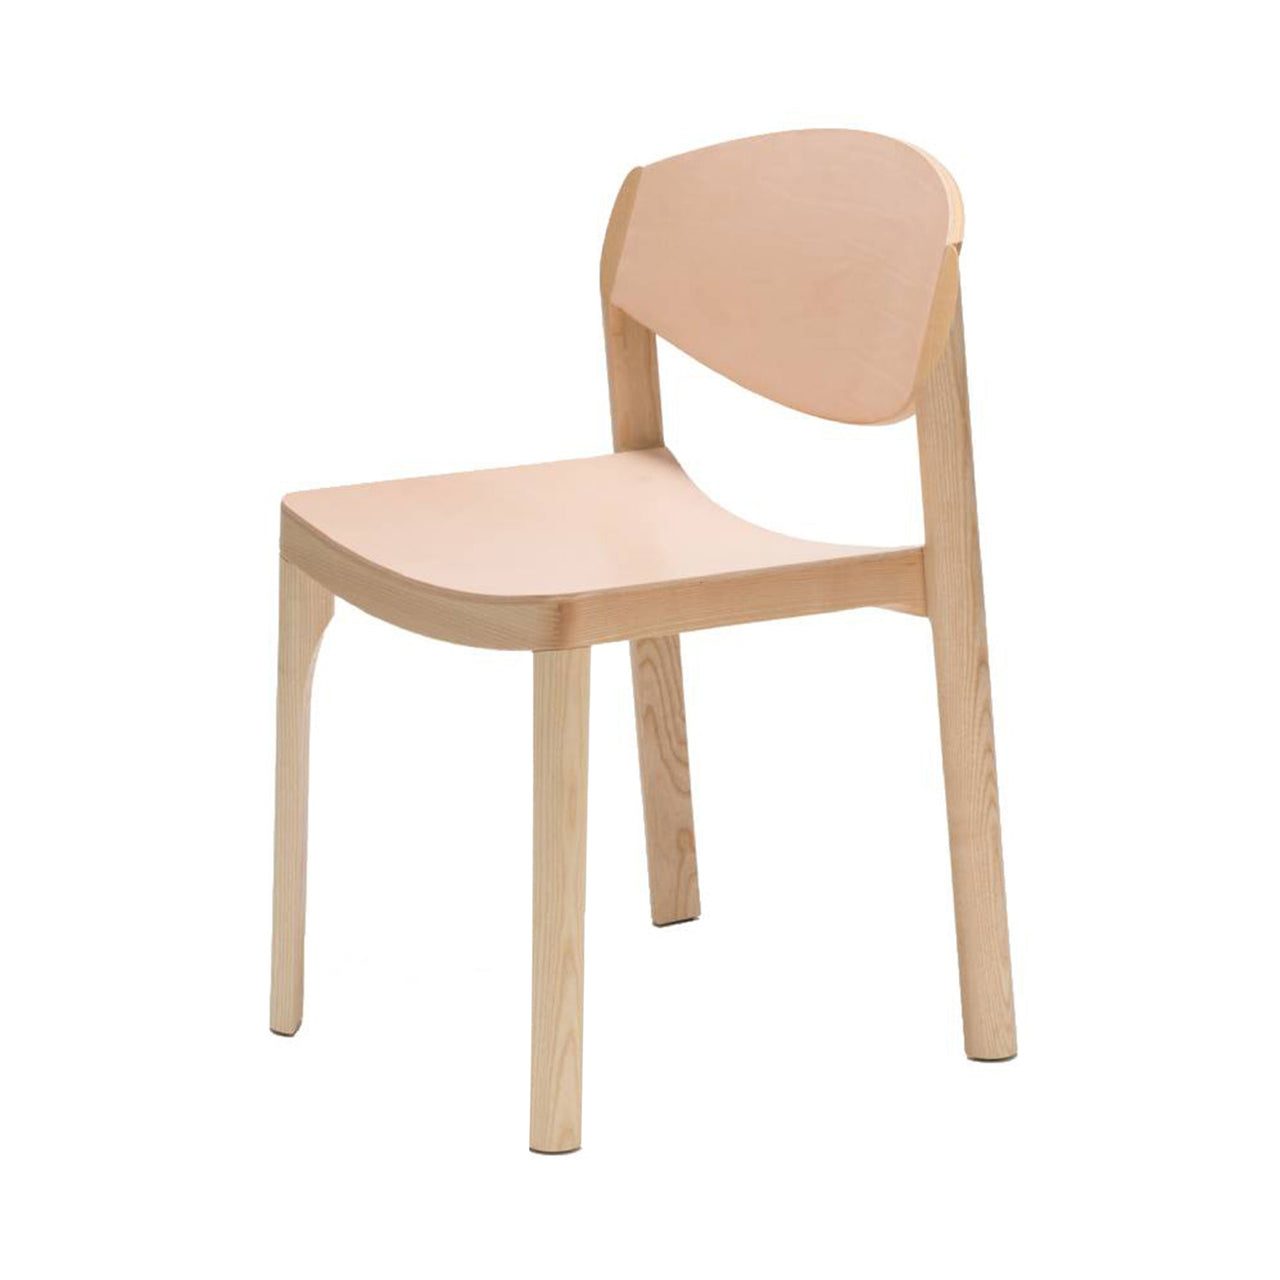 Mauro Chair: Leather + 1 + Ash + Natural Leather